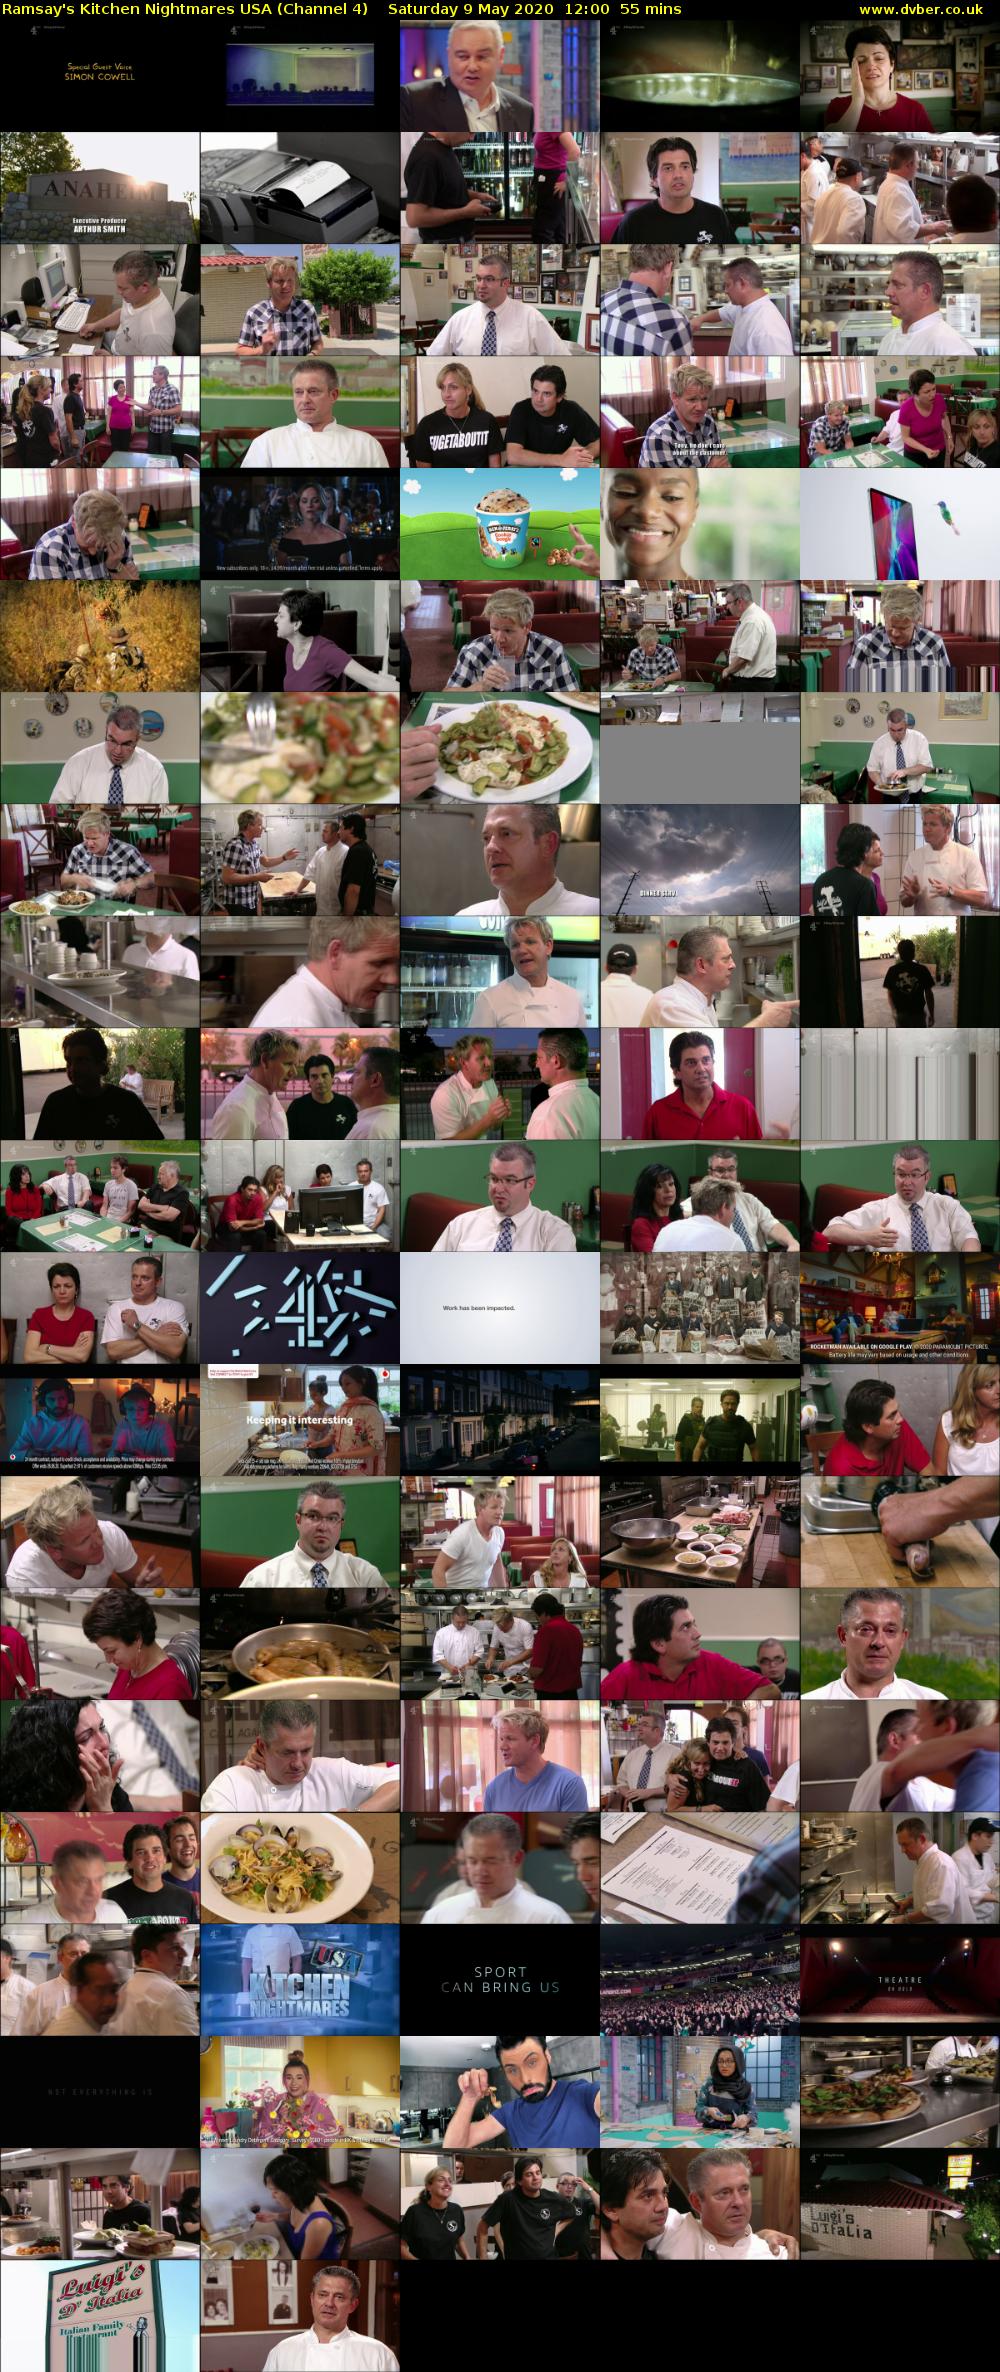 Ramsay's Kitchen Nightmares USA (Channel 4) Saturday 9 May 2020 12:00 - 12:55